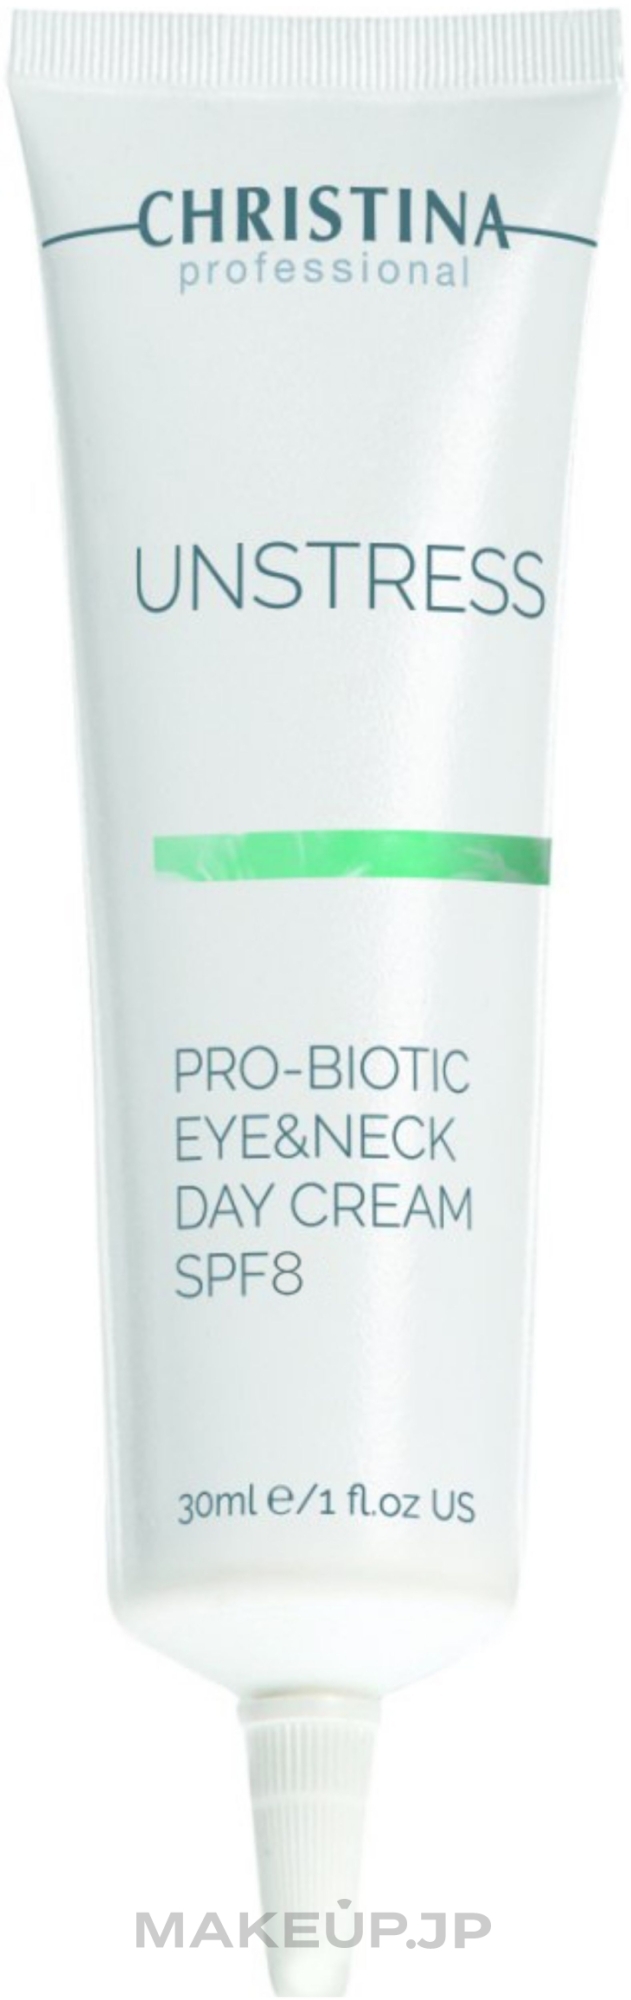 Day Cream for Eye and Neck Skin "Probiotic" - Christina Unstress Probiotic Day Cream For Eye And Neck — photo 30 ml